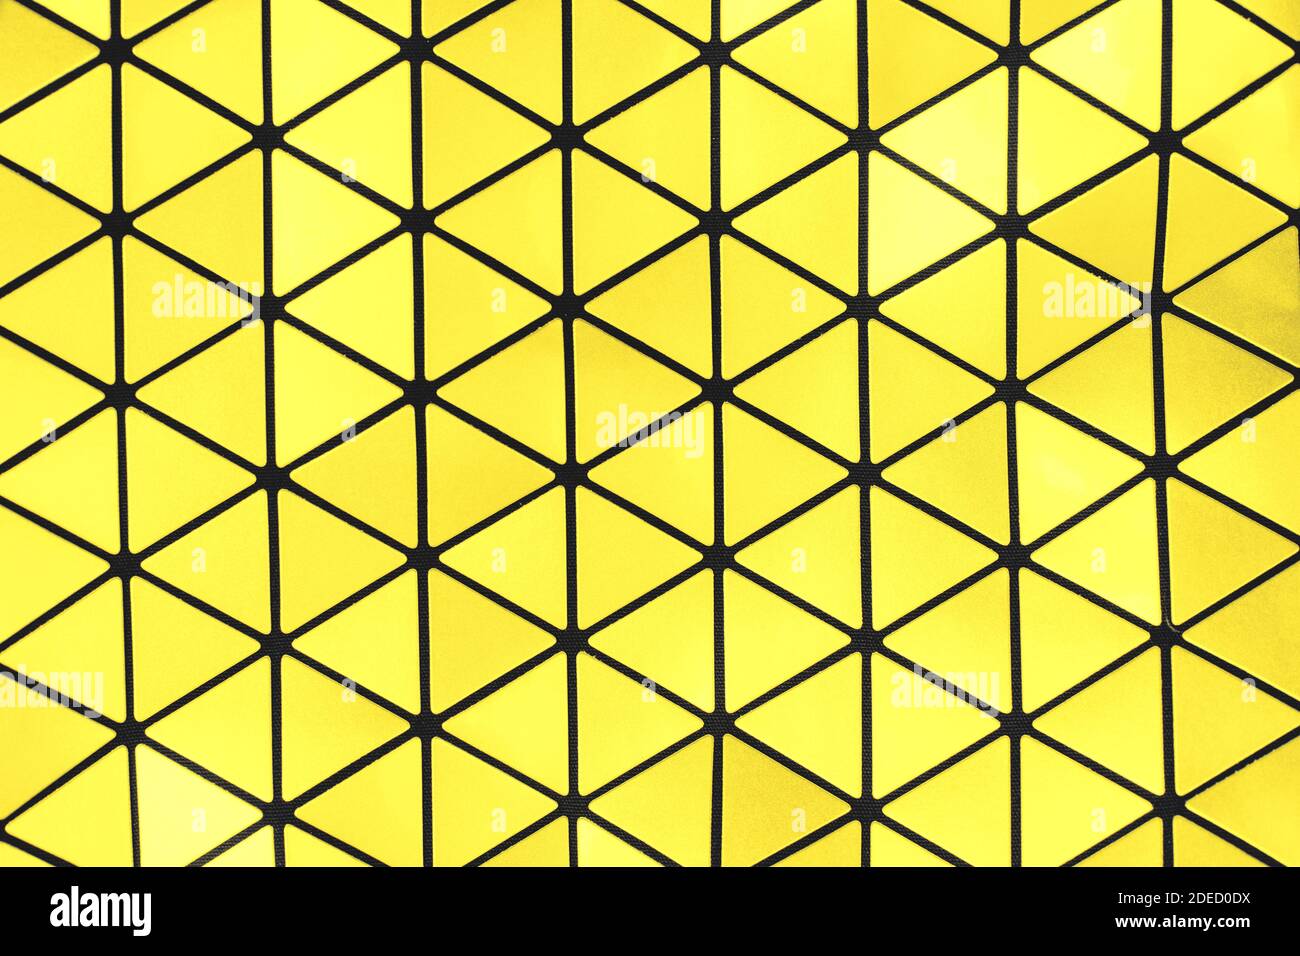 yellow and black colored abstract futuristic metallic geometric background Stock Photo